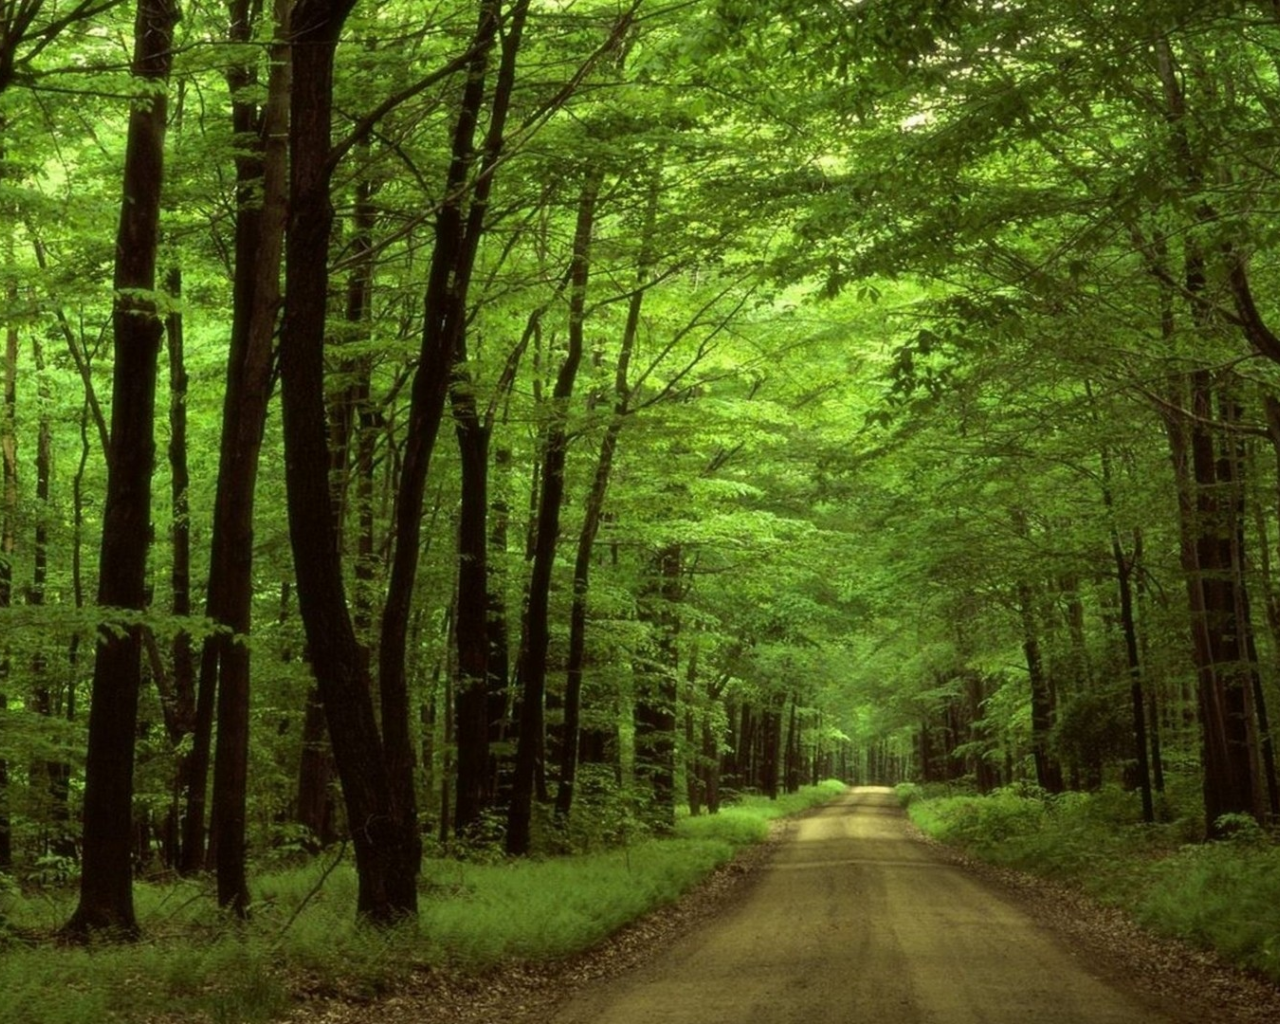 sunlight, trees, forest, nature, road, green